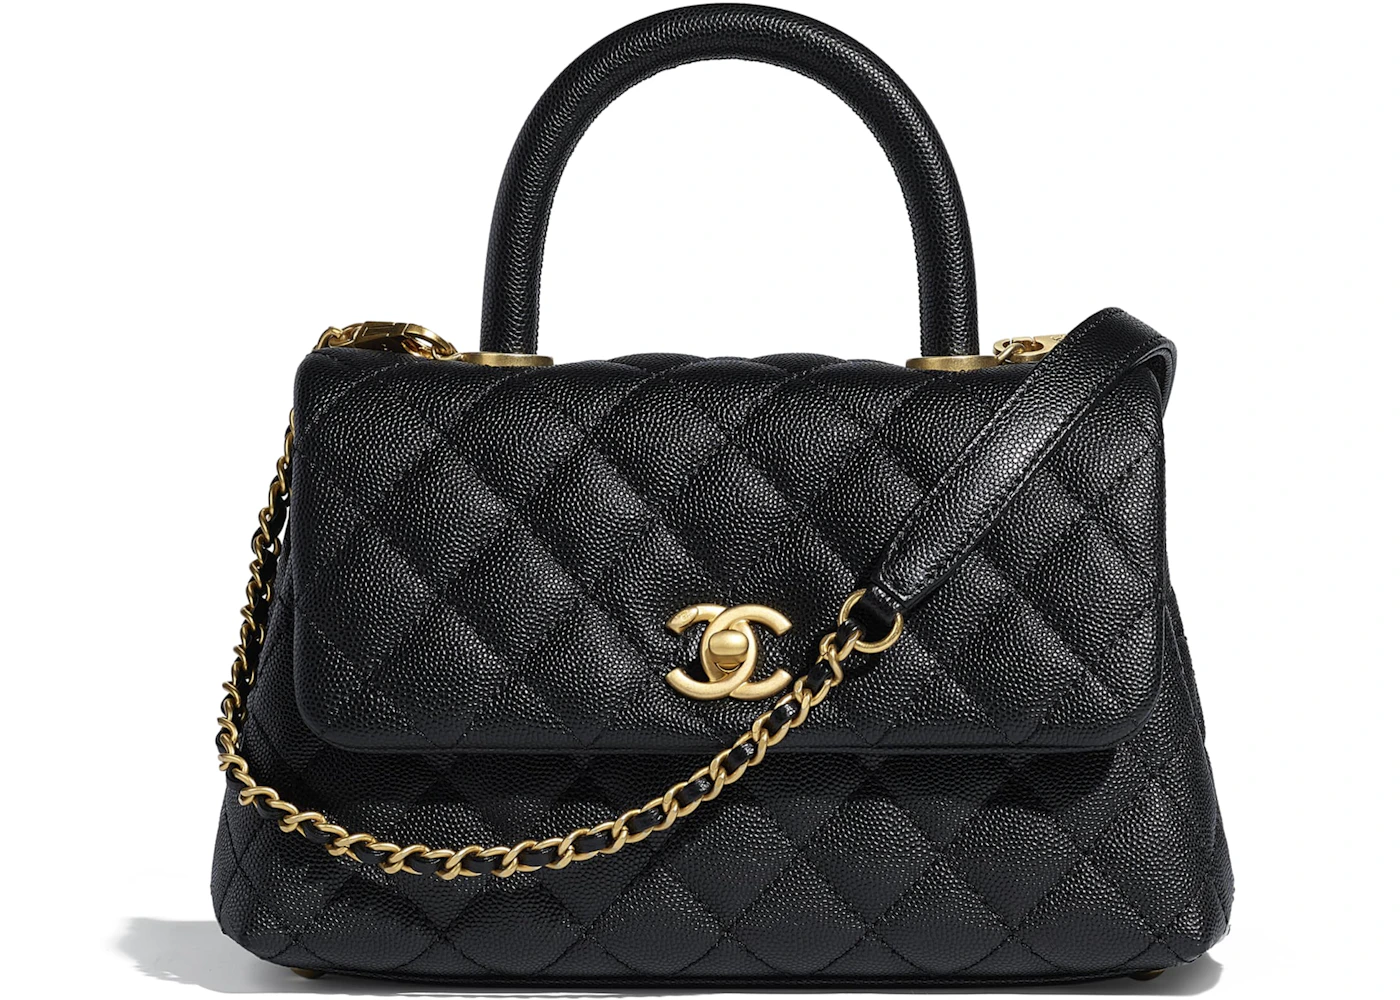 Chanel Large Flap Bag with Top Handle, Black, 33cm